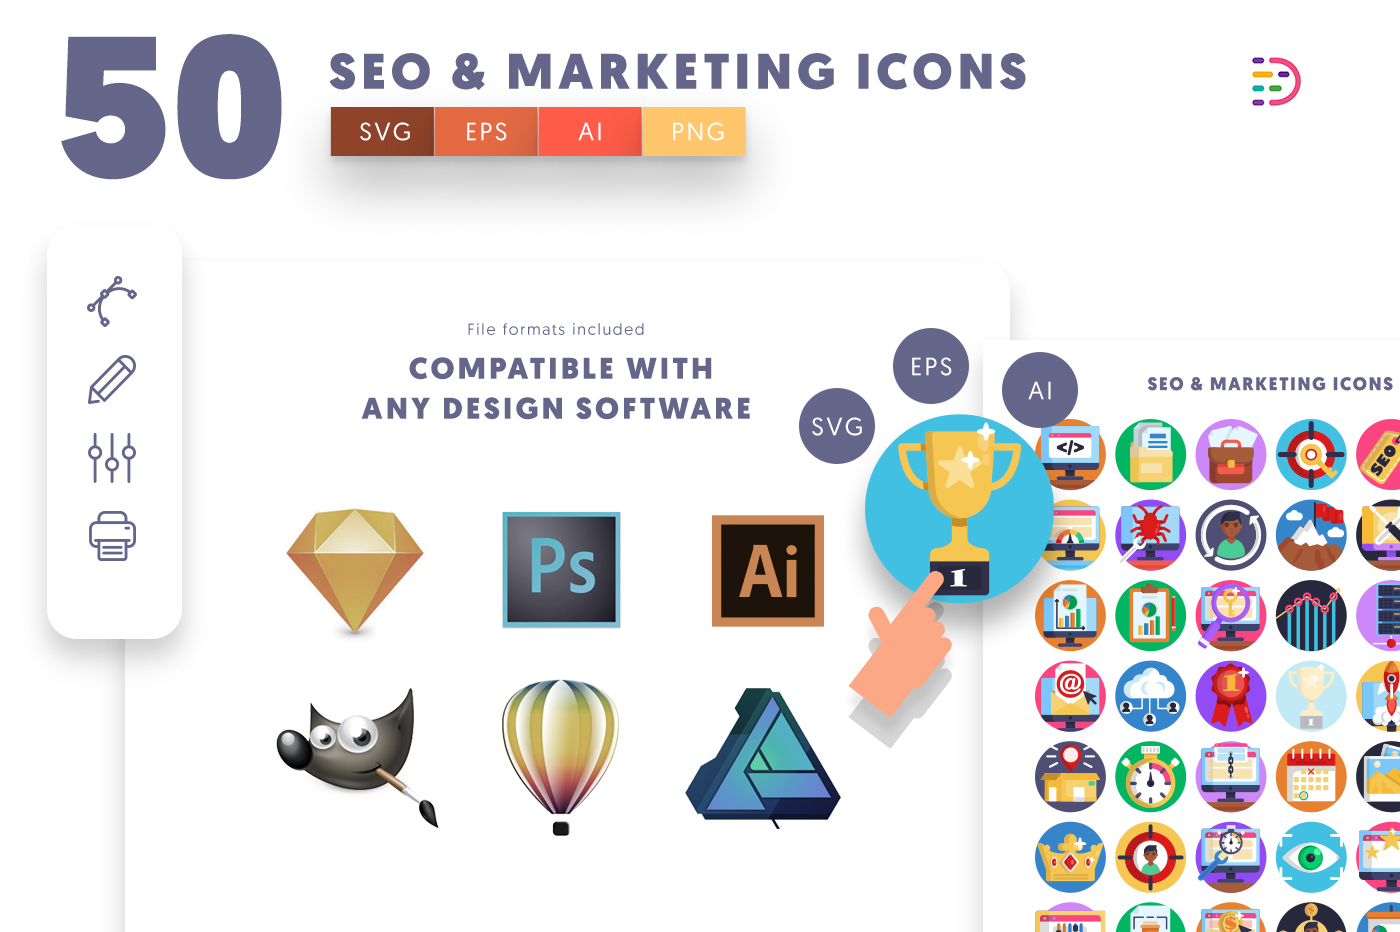  full vector Seo and Marketing Icons